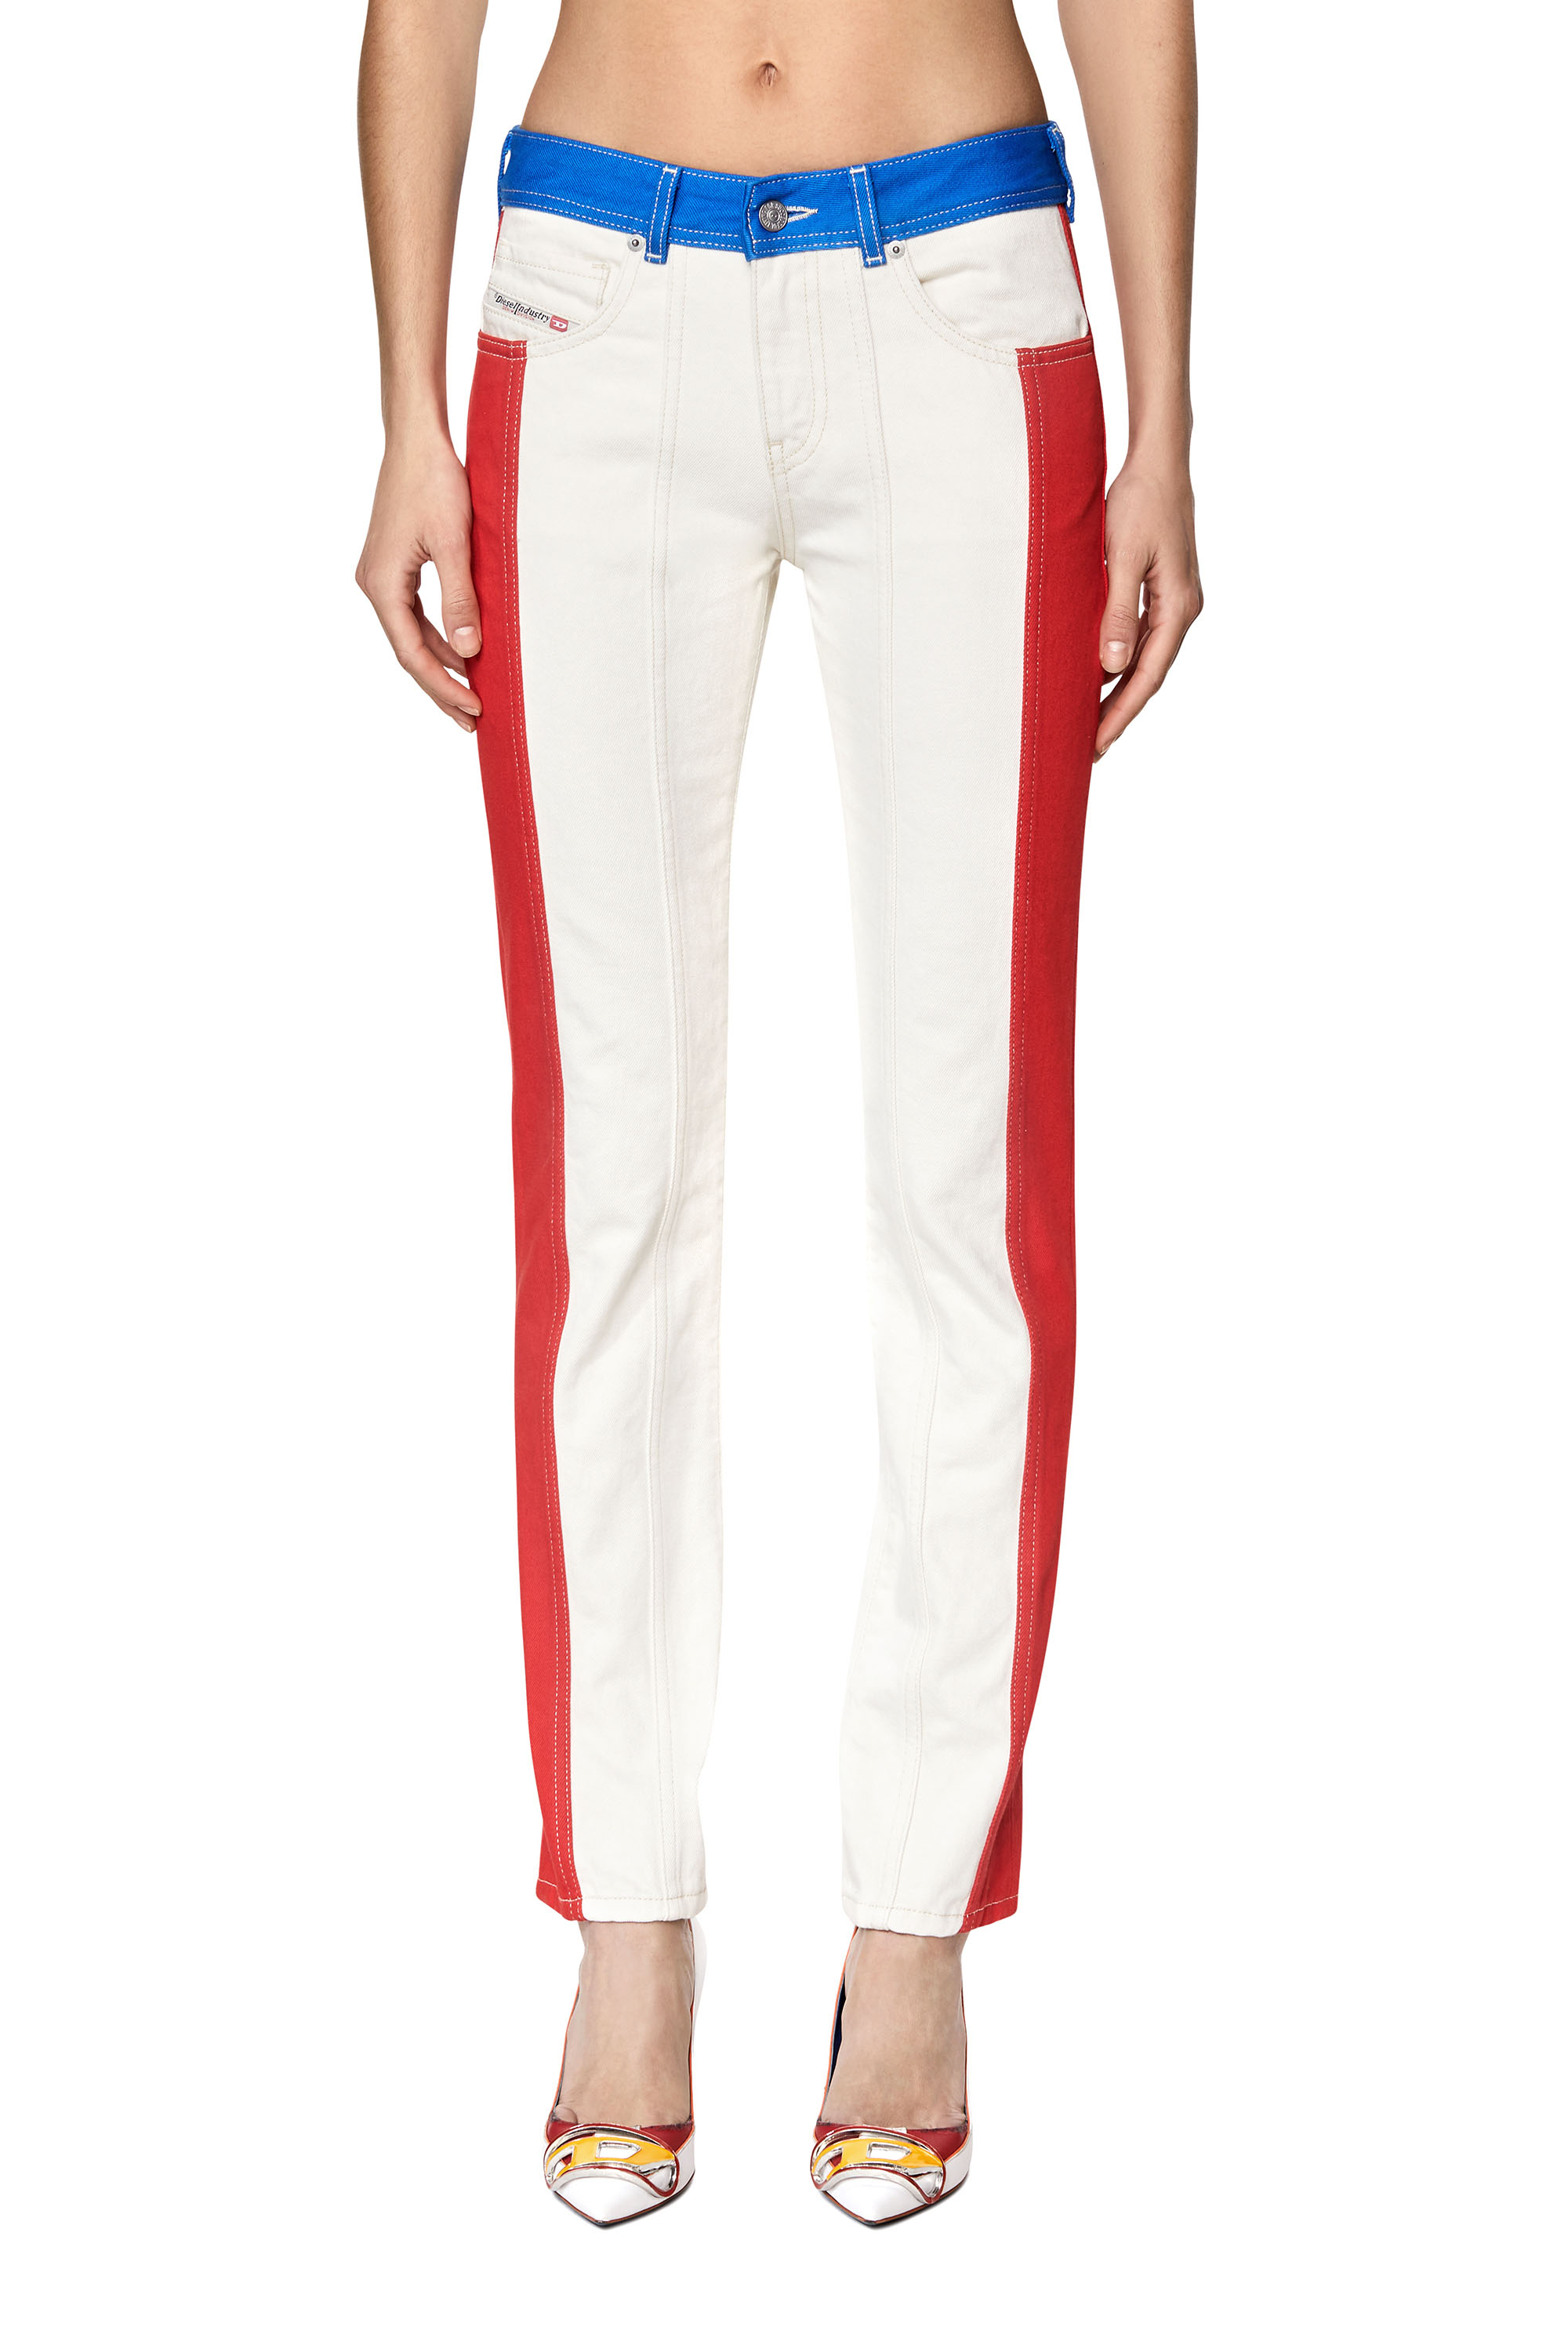 2002 0EIAR Straight Jeans, White/Red